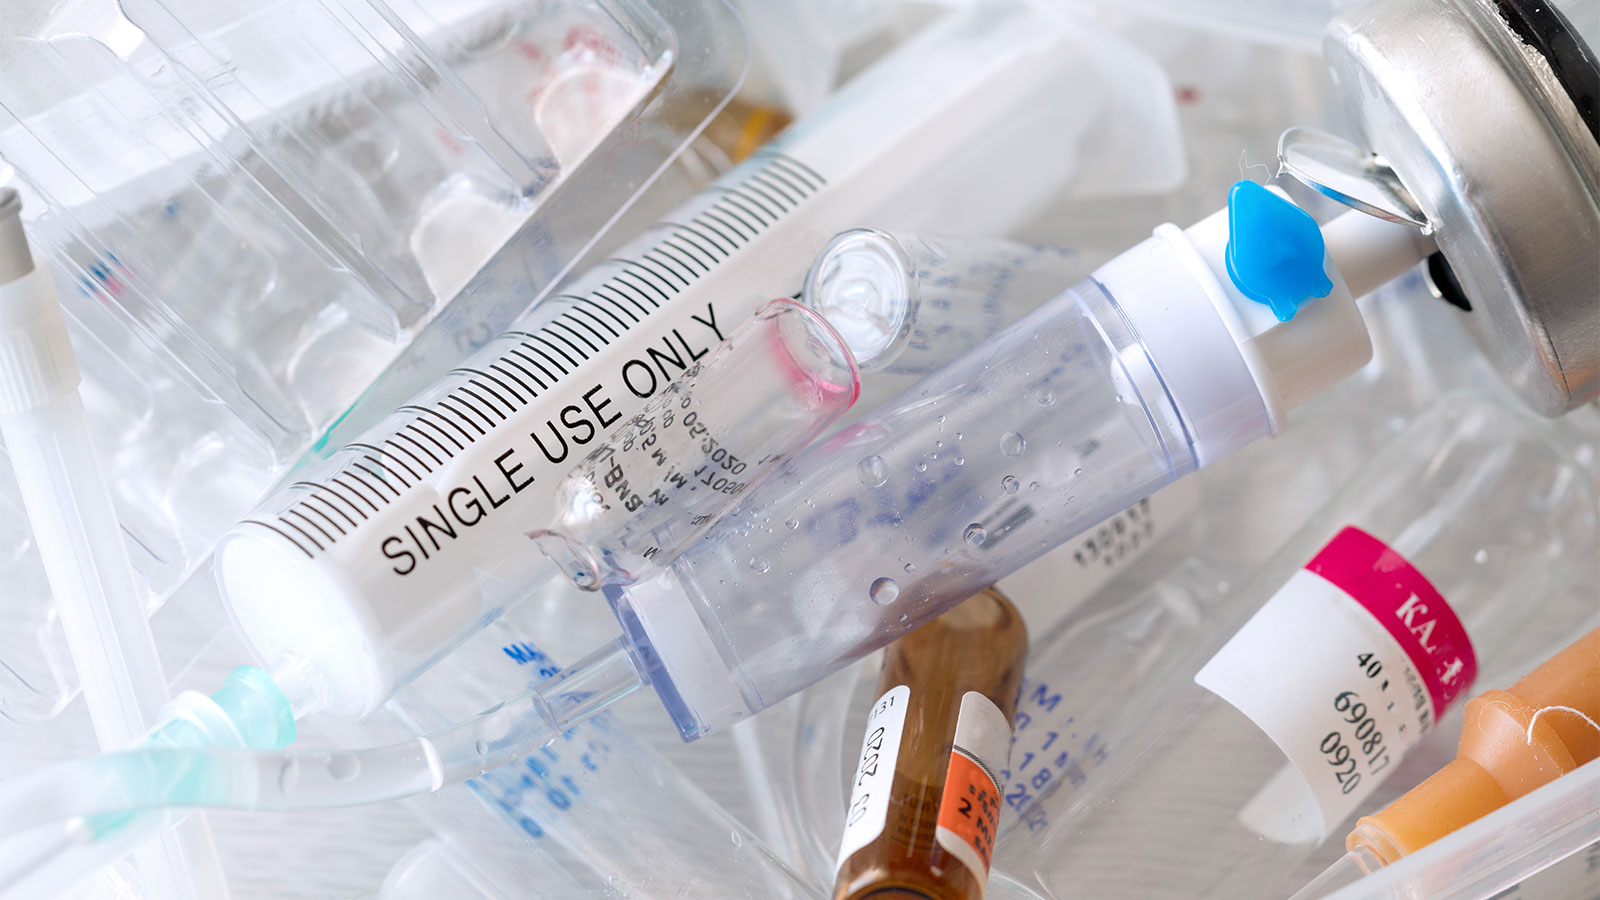 Close up photo of used medical syringes and ampoules